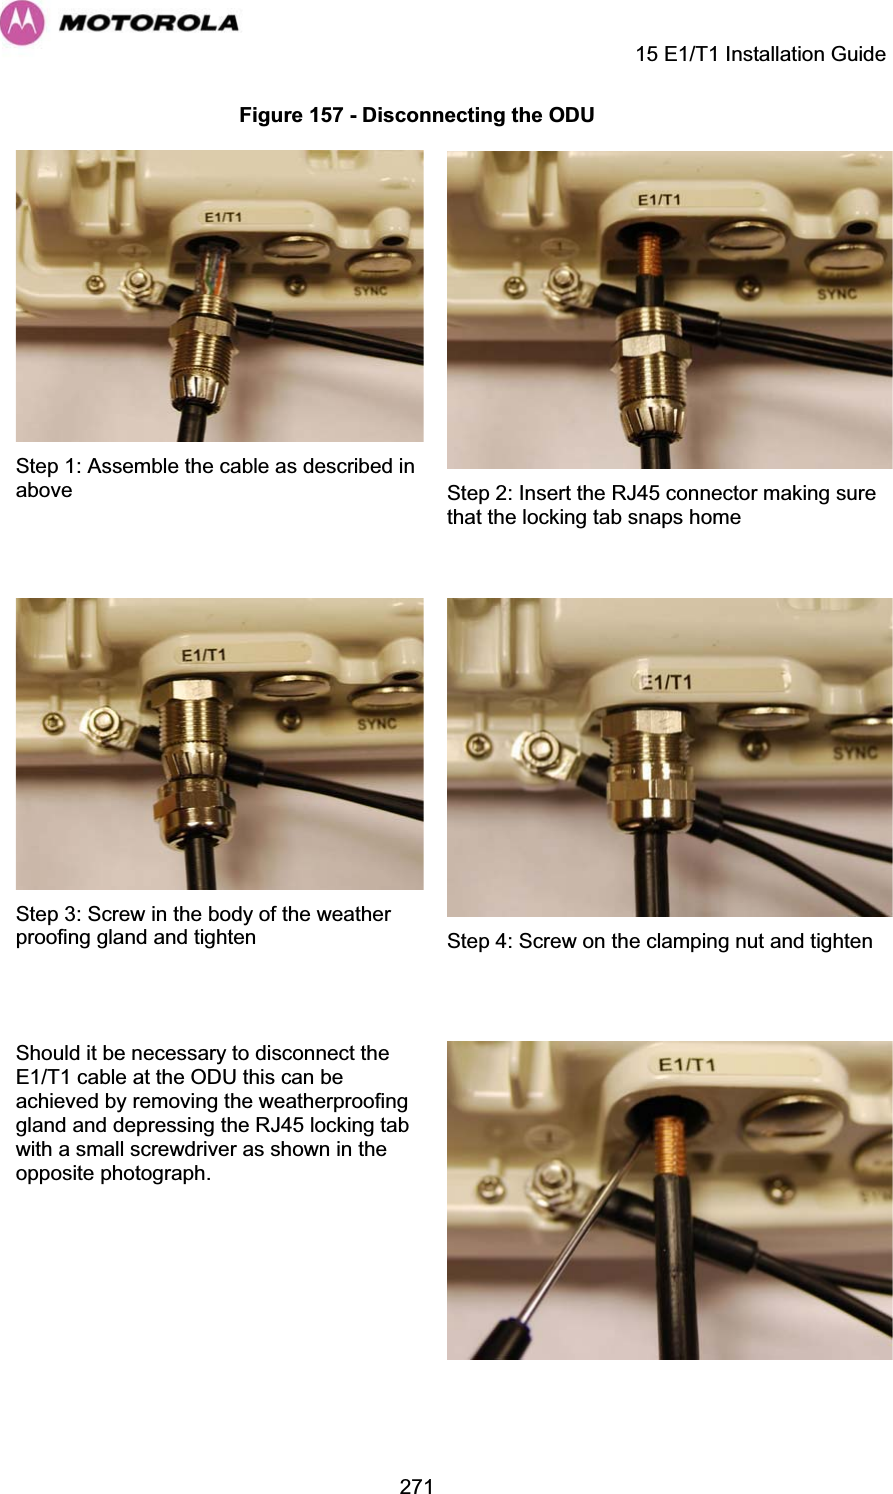     15 E1/T1 Installation Guide  271Figure 157 - Disconnecting the ODU  Step 1: Assemble the cable as described in above  Step 2: Insert the RJ45 connector making sure that the locking tab snaps home  Step 3: Screw in the body of the weather proofing gland and tighten  Step 4: Screw on the clamping nut and tighten Should it be necessary to disconnect the E1/T1 cable at the ODU this can be achieved by removing the weatherproofing gland and depressing the RJ45 locking tab with a small screwdriver as shown in the opposite photograph.    